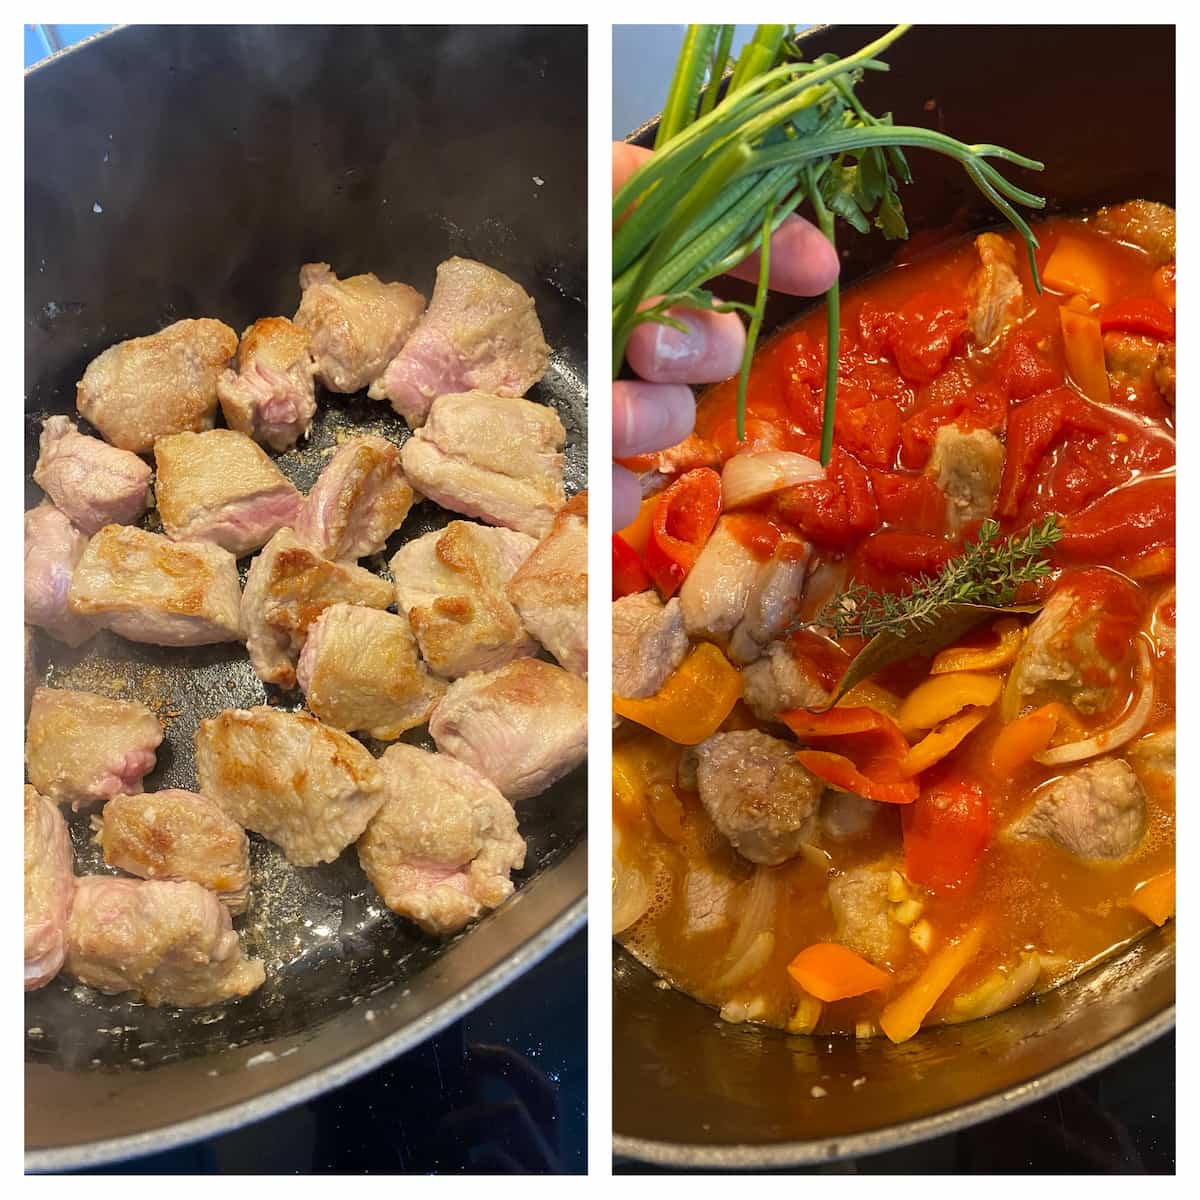 browning veal pieces in a crock pot then adding tomatoes, vegetables and herbs